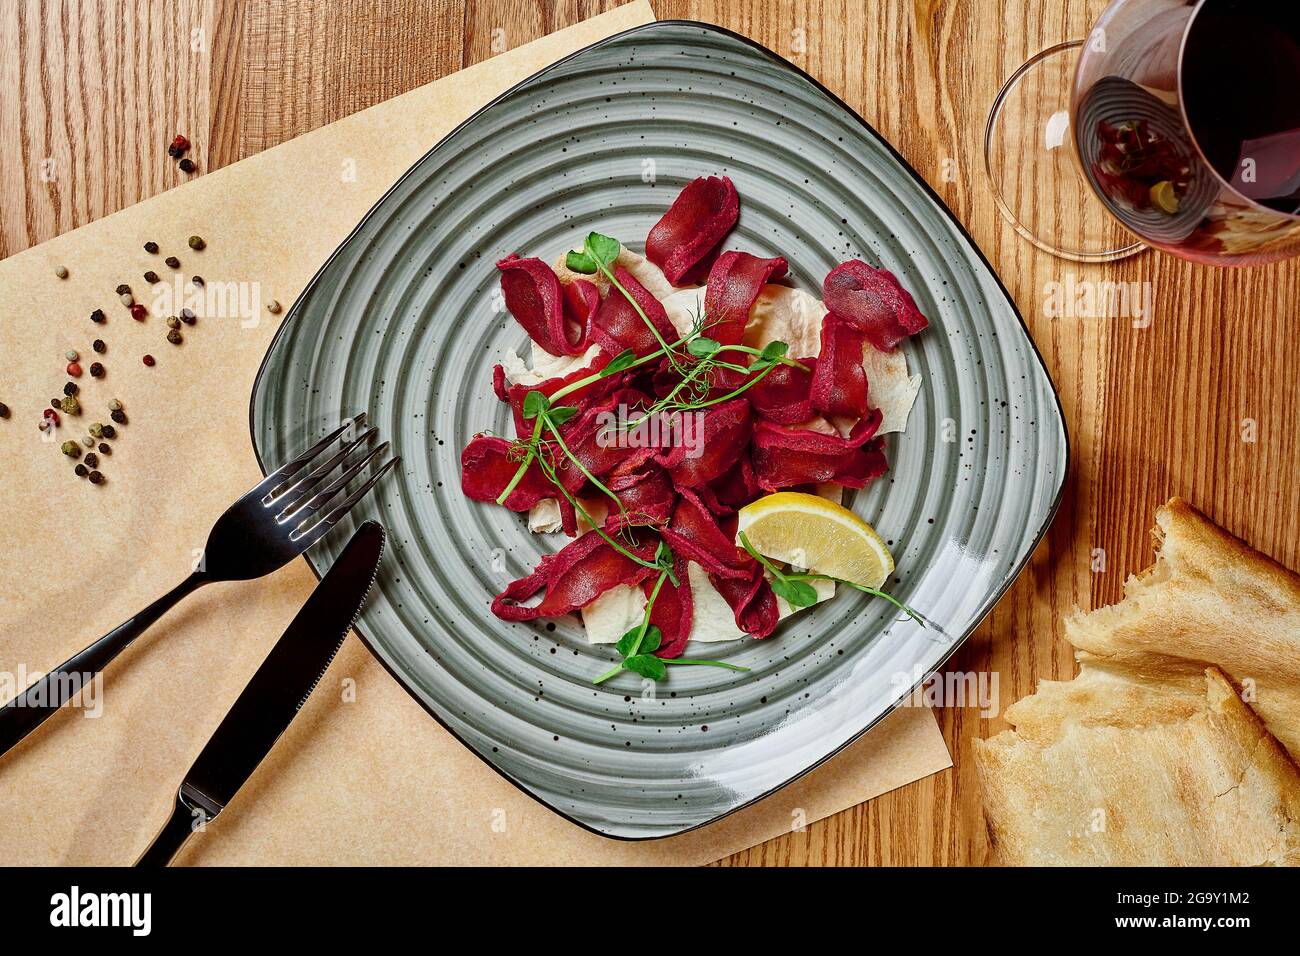 Sliced spicy air-dried basturma with flatbread and red wine Stock Photo